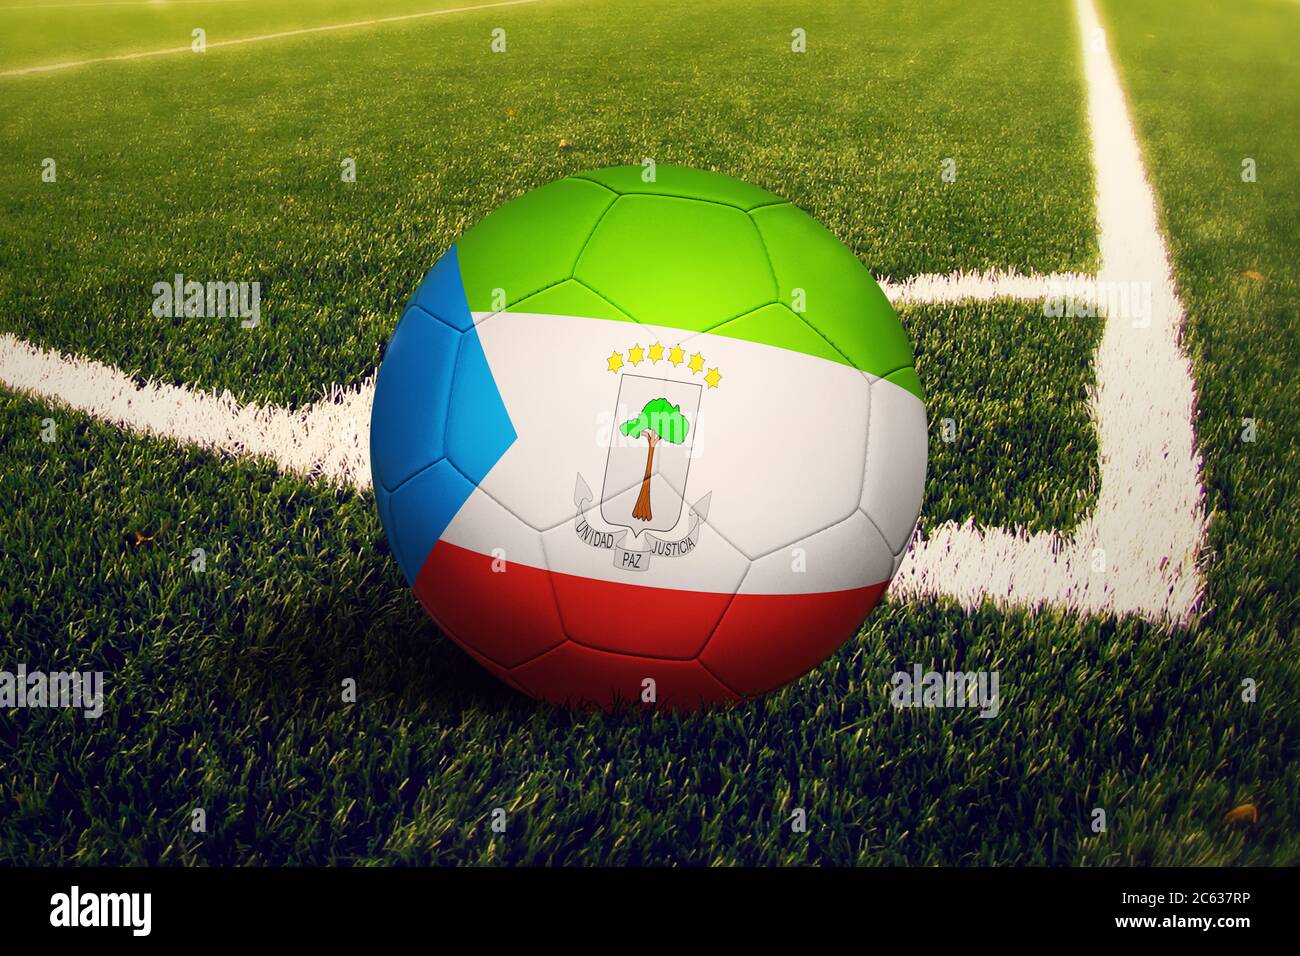 Equatorial Guinea flag on ball at corner kick position, soccer field background. National football theme on green grass. Stock Photo